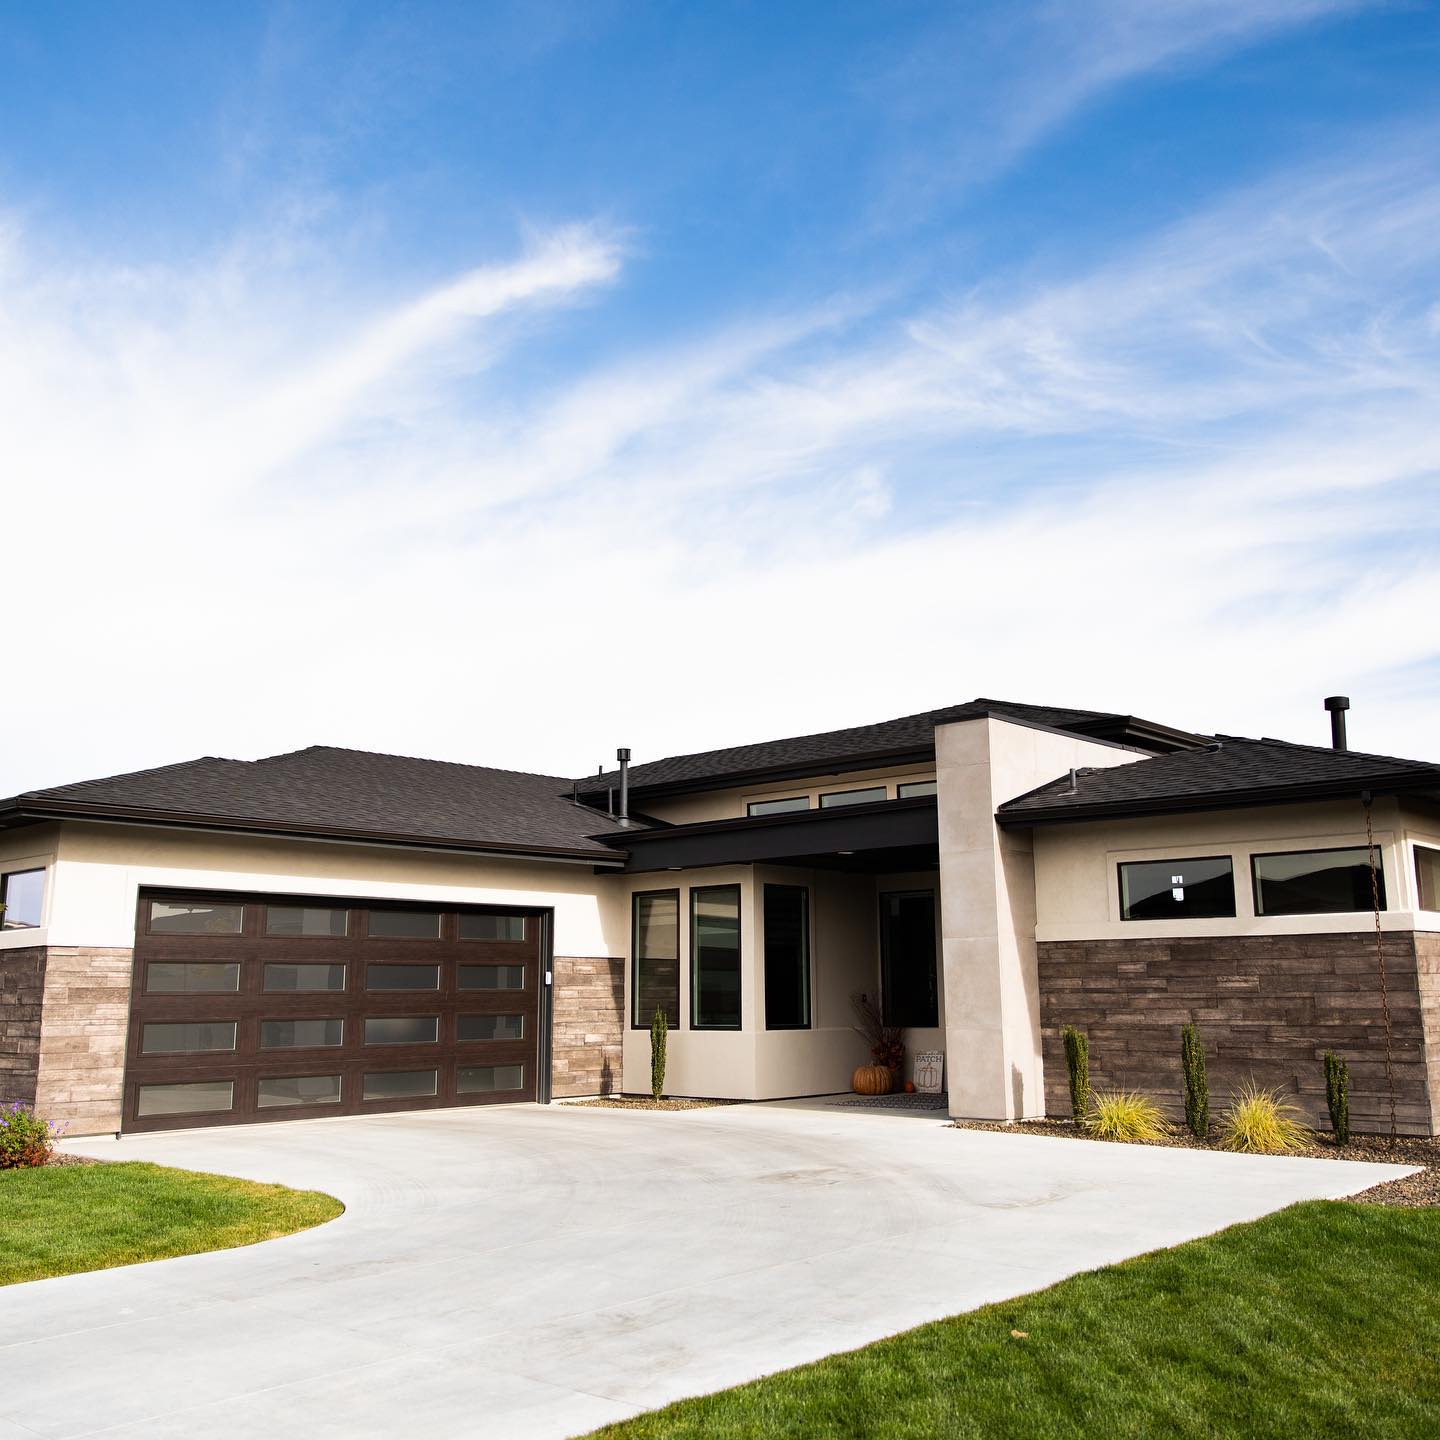 What Contemporary Garage Doors Can Do for Your Home